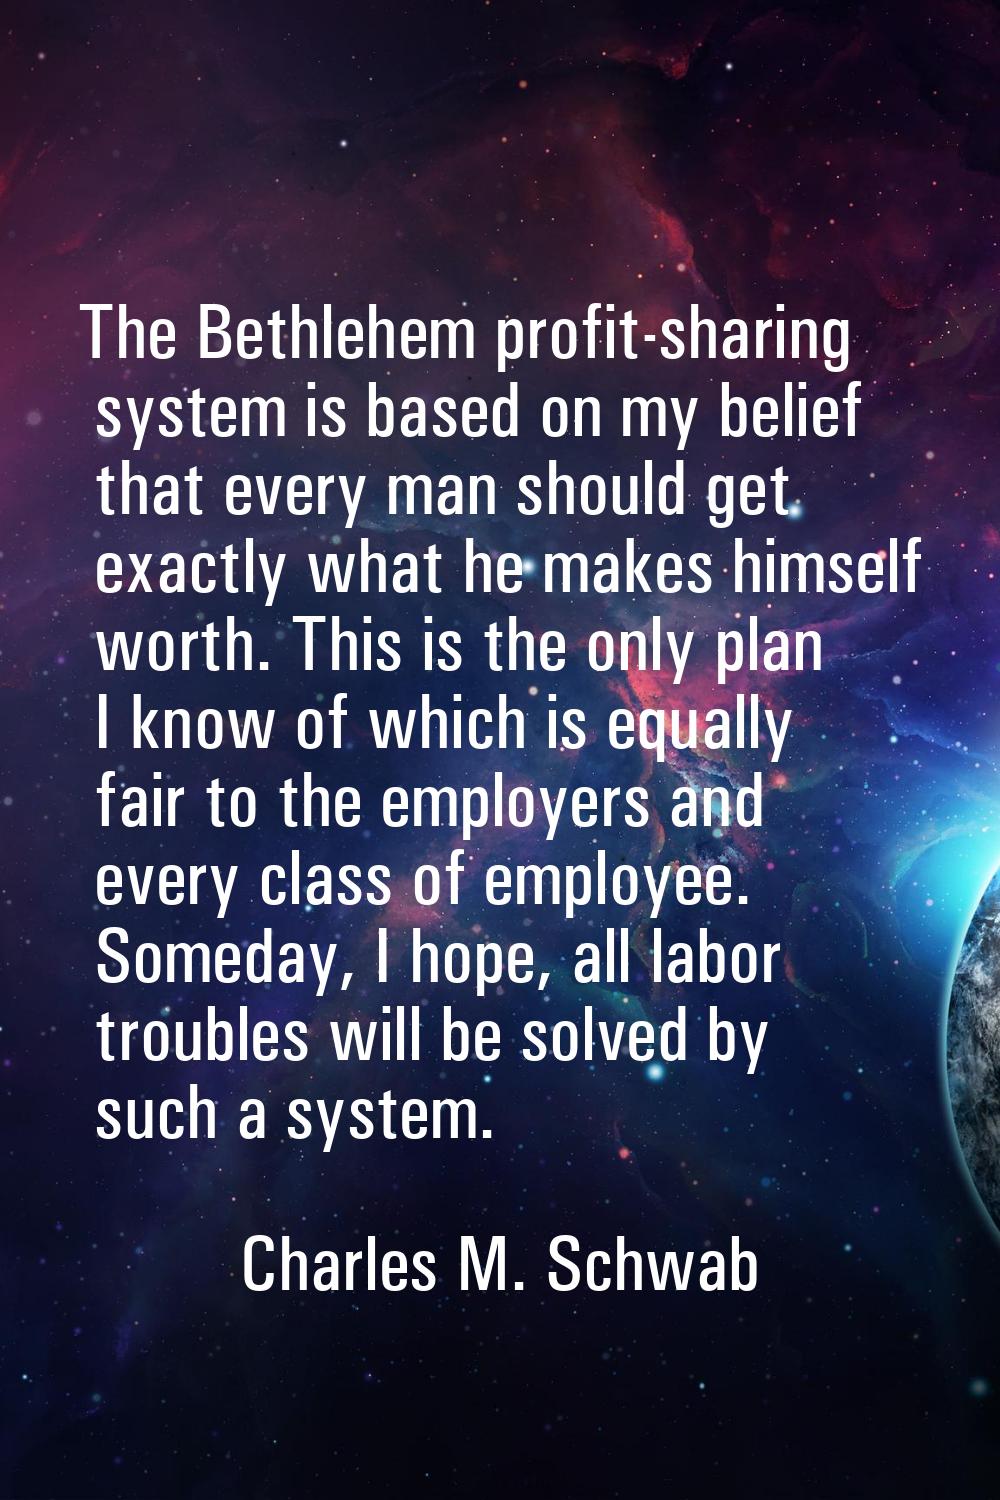 The Bethlehem profit-sharing system is based on my belief that every man should get exactly what he